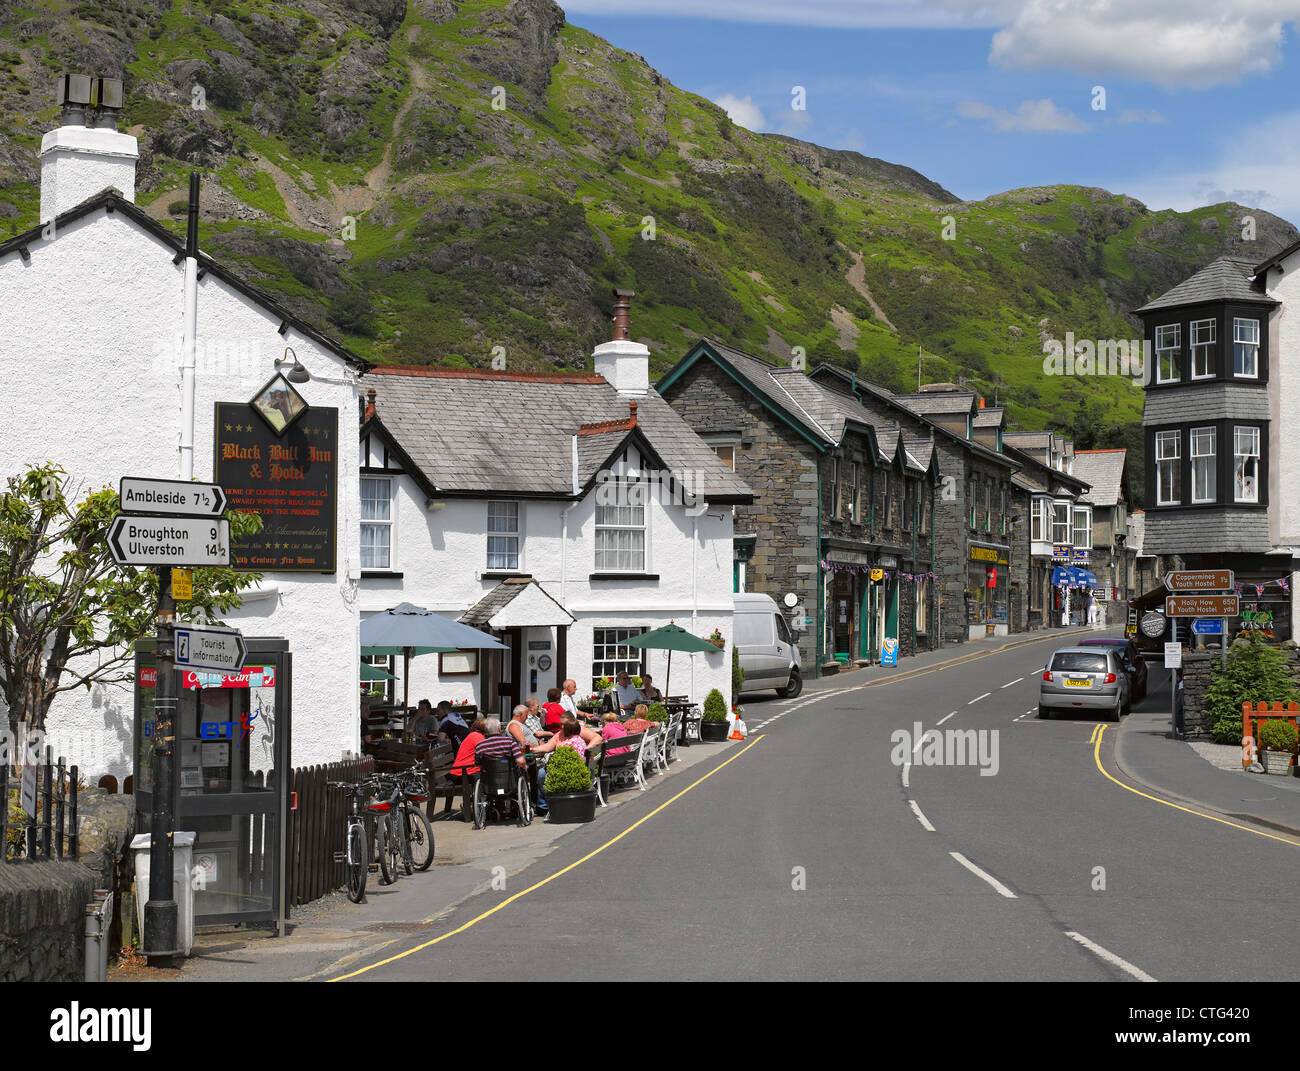 People tourist visitors outside the Black Bull Inn pub shops and cottages summer Coniston village Cumbria England UK United Kingdom GB Great Britain Stock Photo